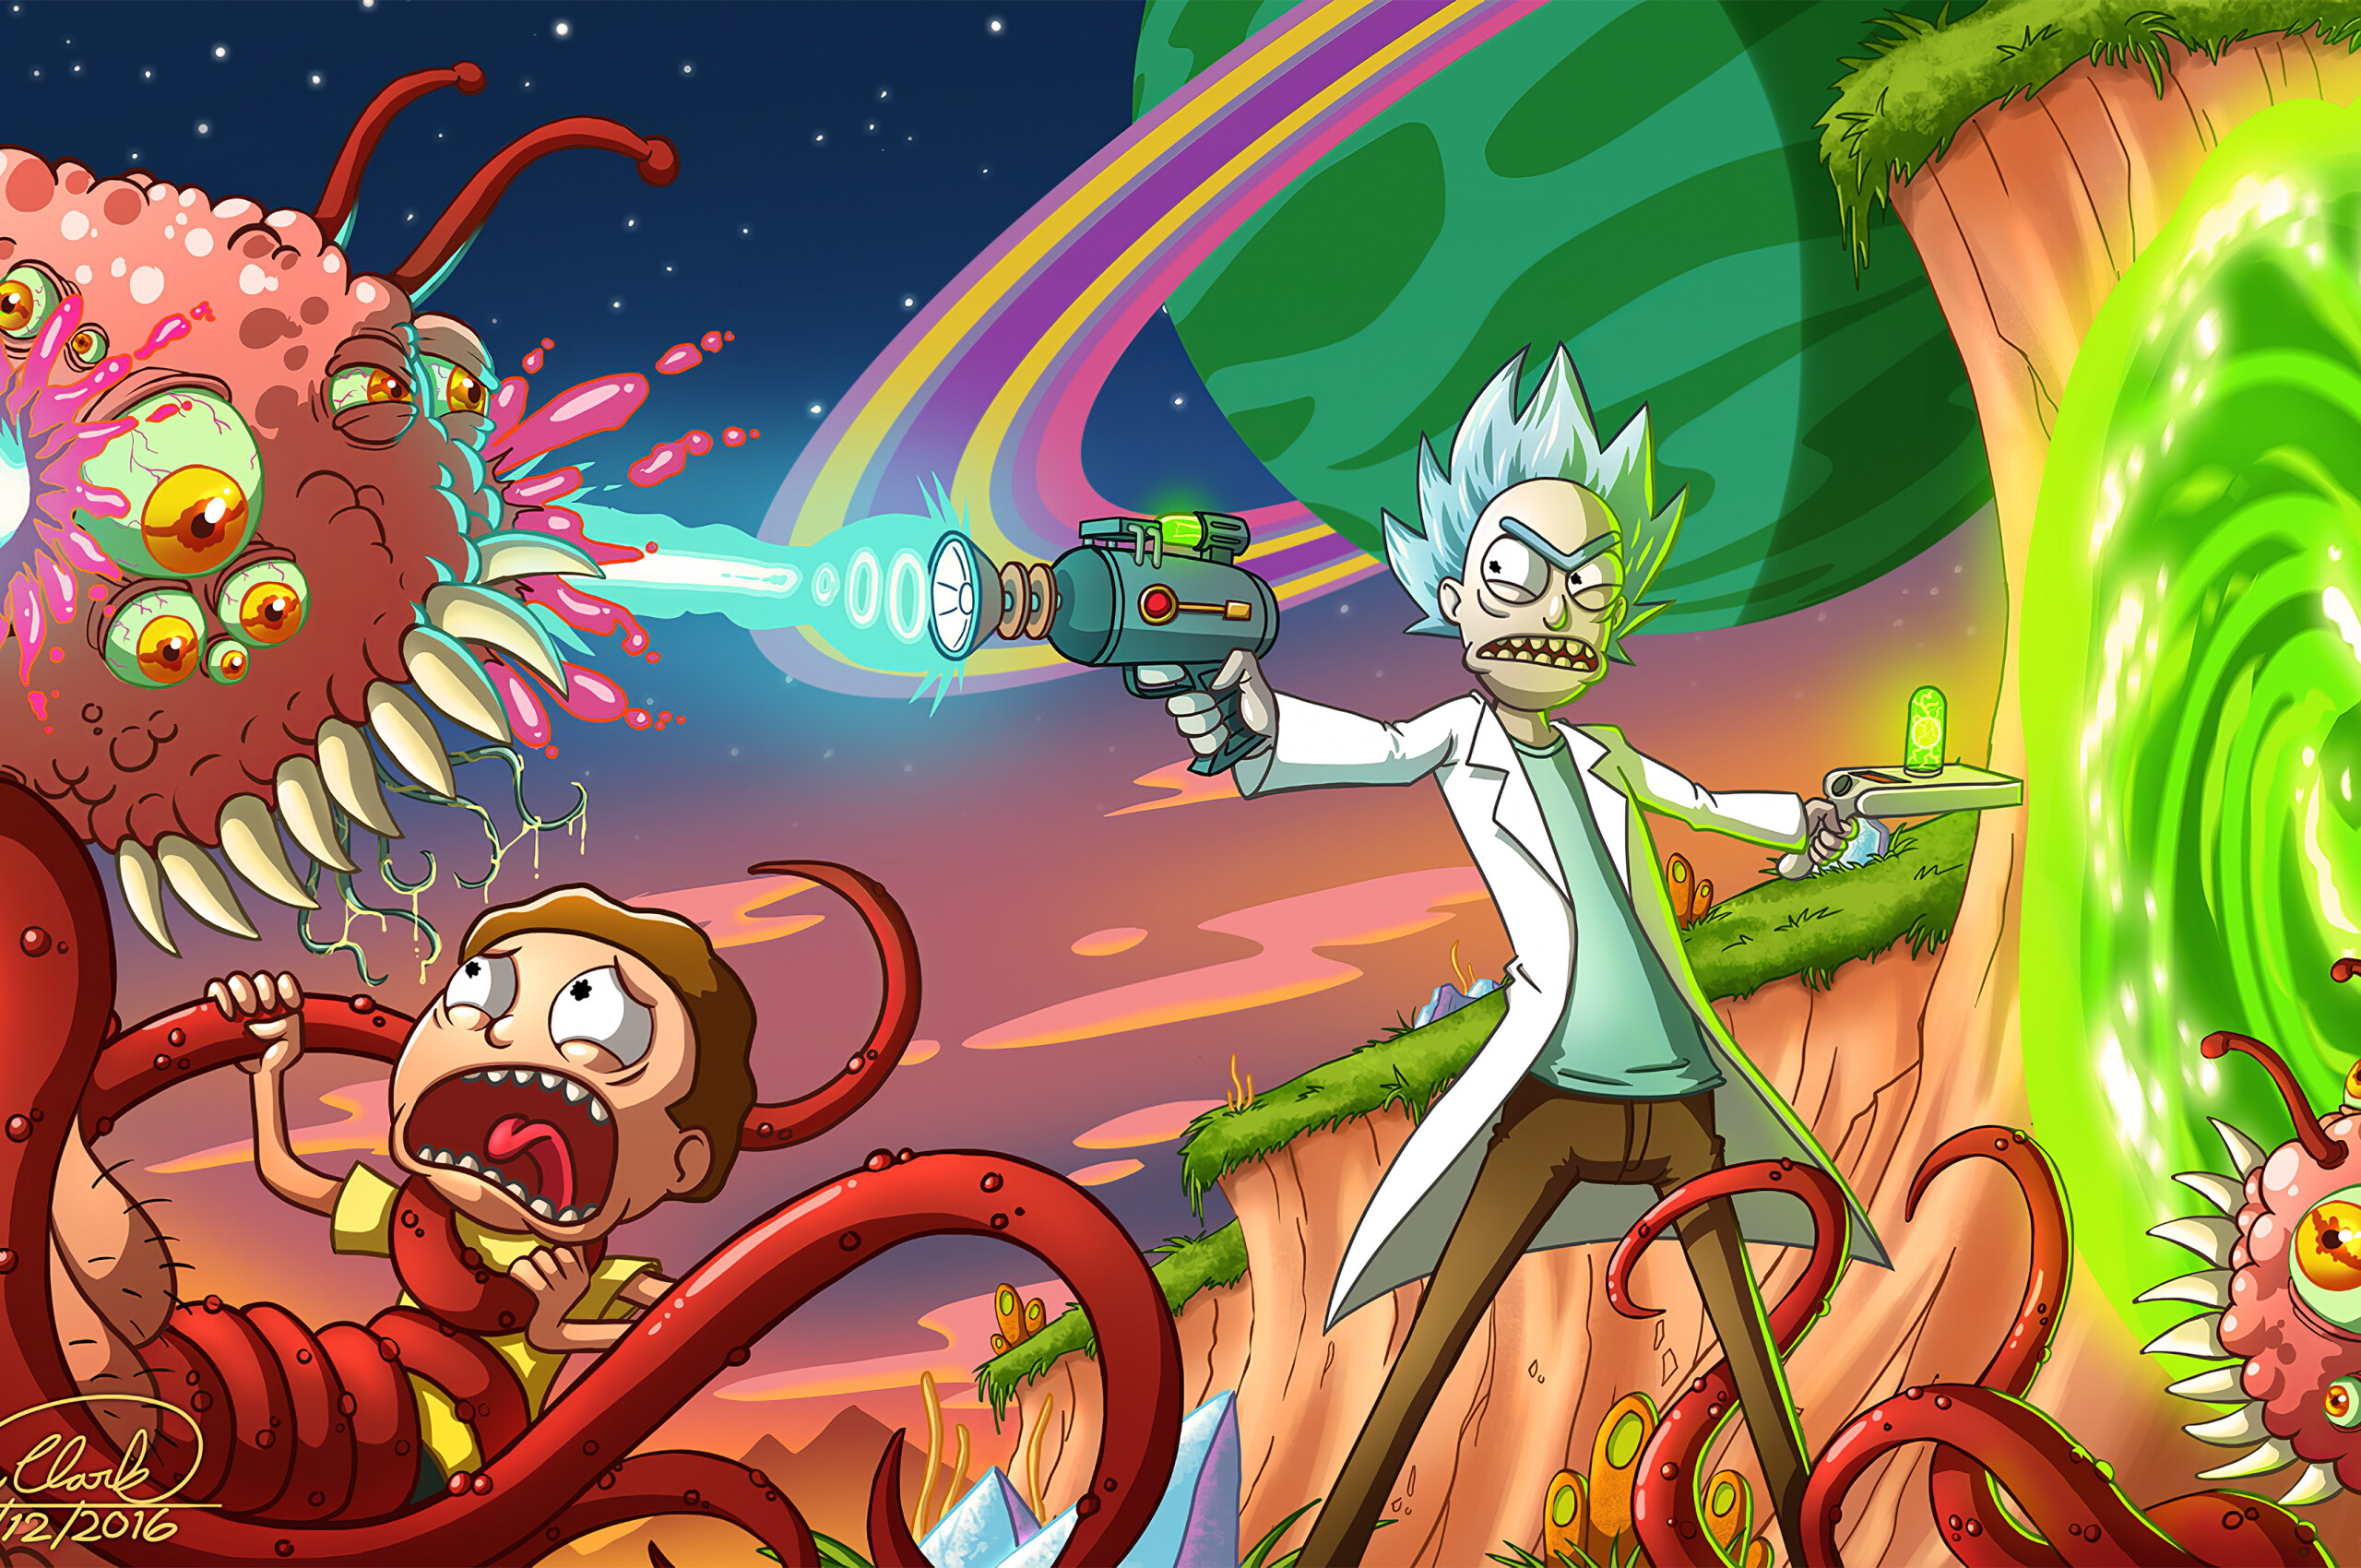 Rick and Morty: The series has several times been the most viewed television comedy of adults. 2560x1700 HD Background.